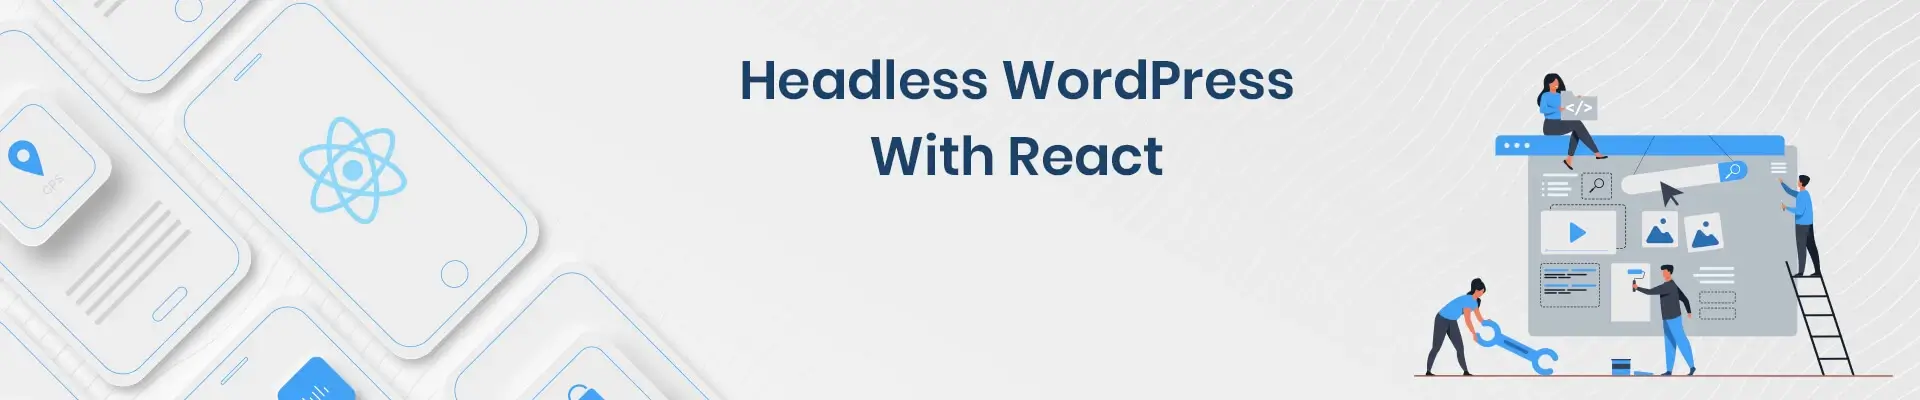 How To Make Use Of Headless WordPress With React? [2021]